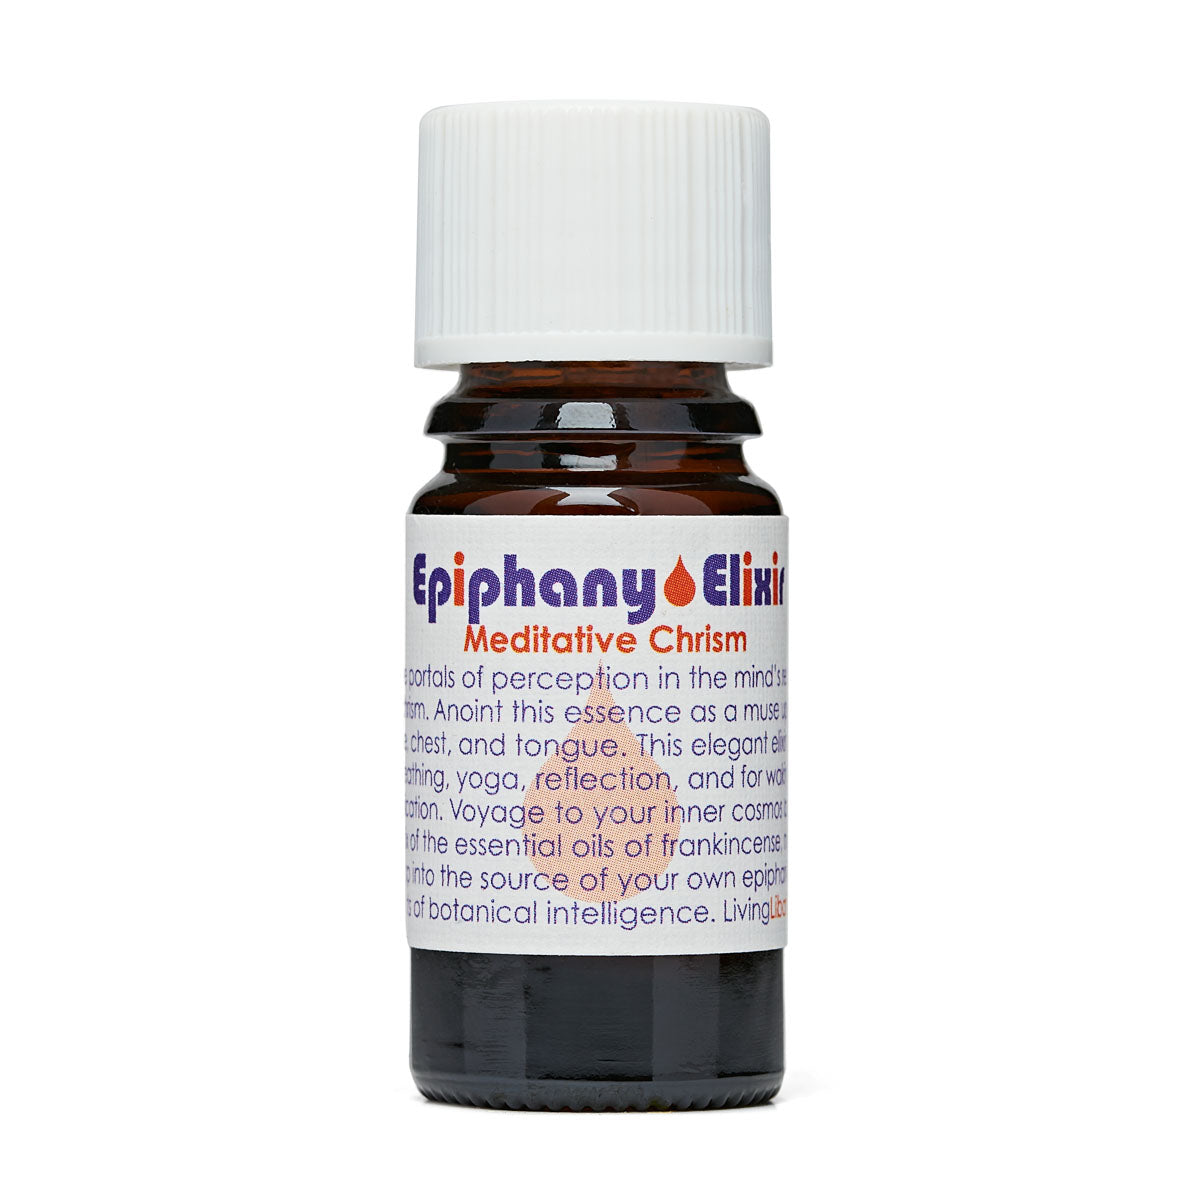 Epiphany Elixir | Living Libations | Raw Living UK | Health Nectar | Living Libations Epiphany Elixir: a fortifying chrism to bring clarity. Made with Golden Rod, Frankincense & Myrrh. Use for Breathing, Yoga & Meditation.